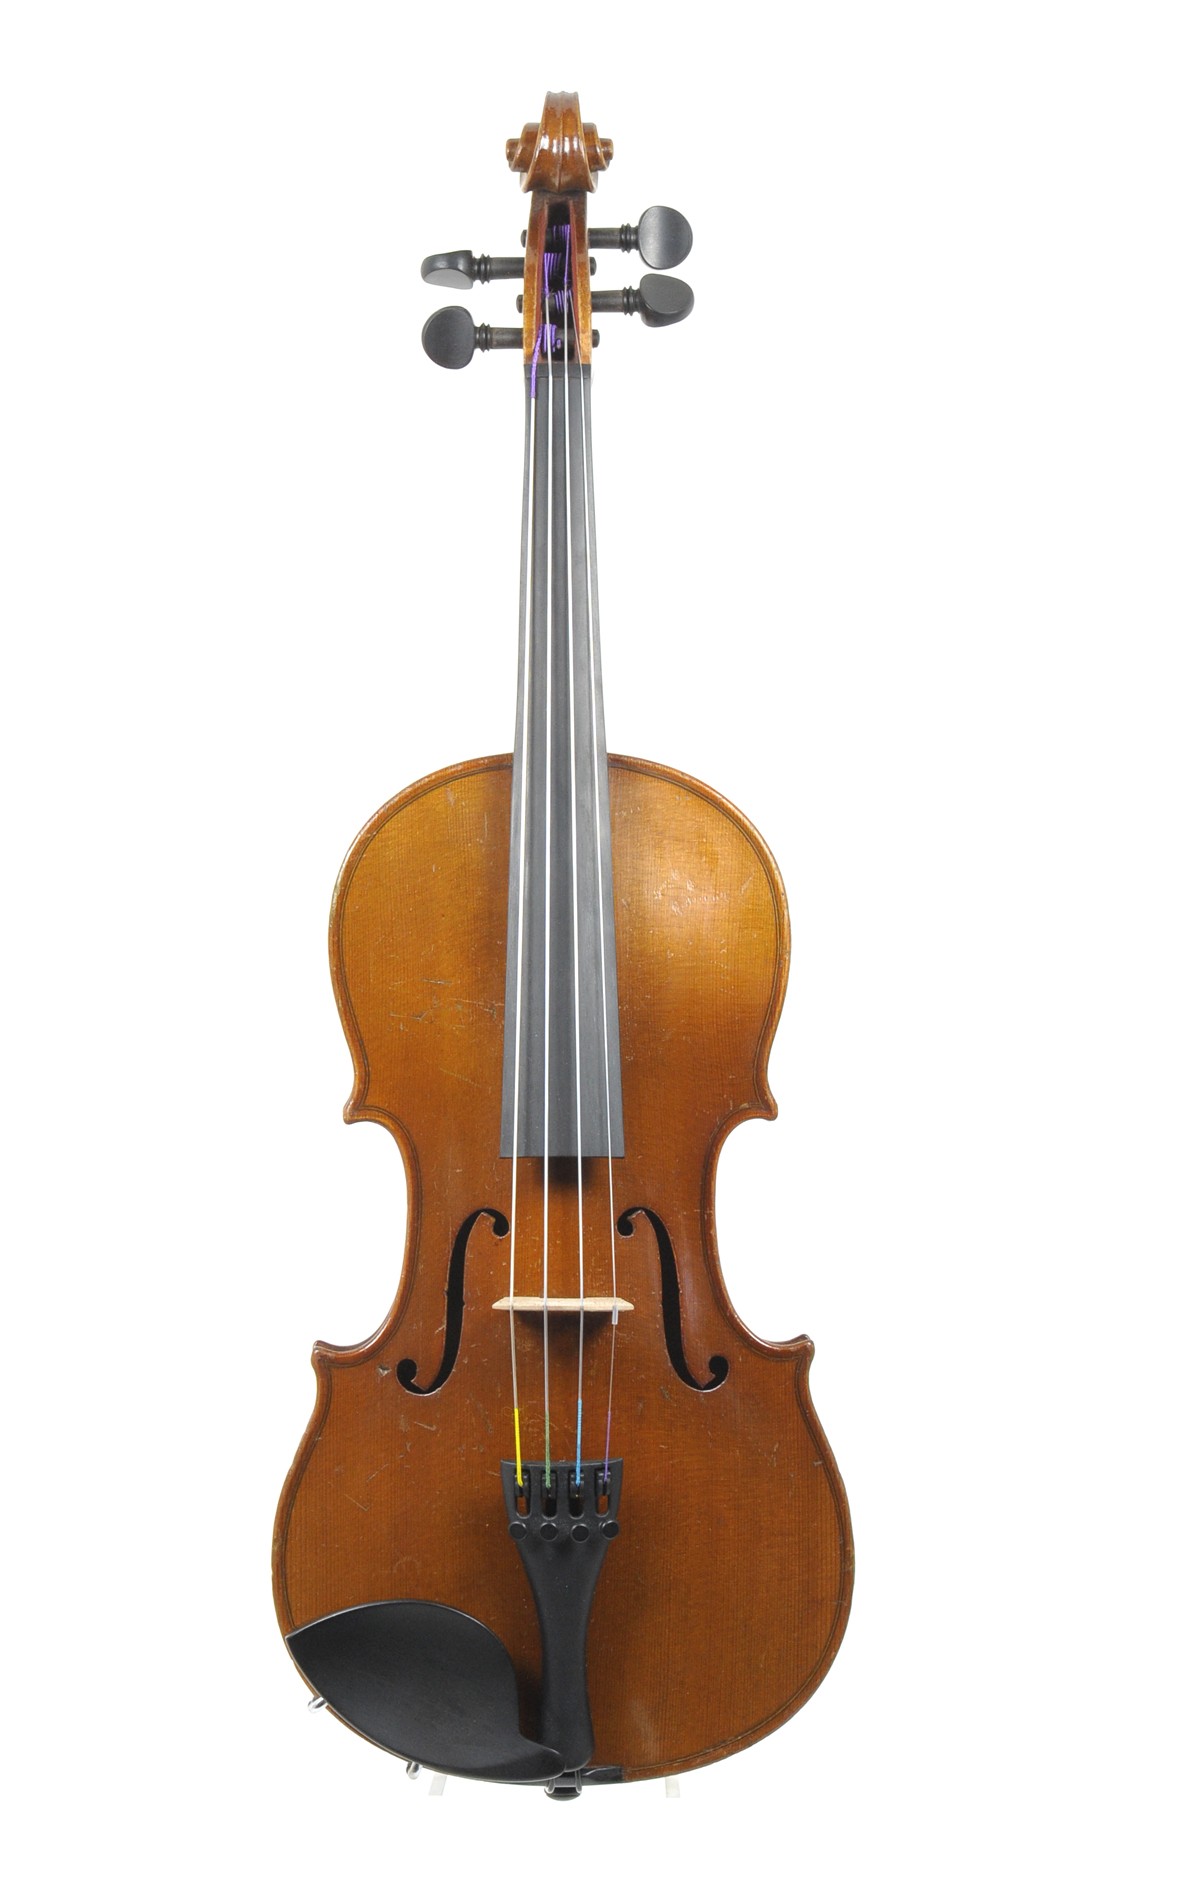 3/4 - attractive 3/4-sized violin from Markneukirchen 